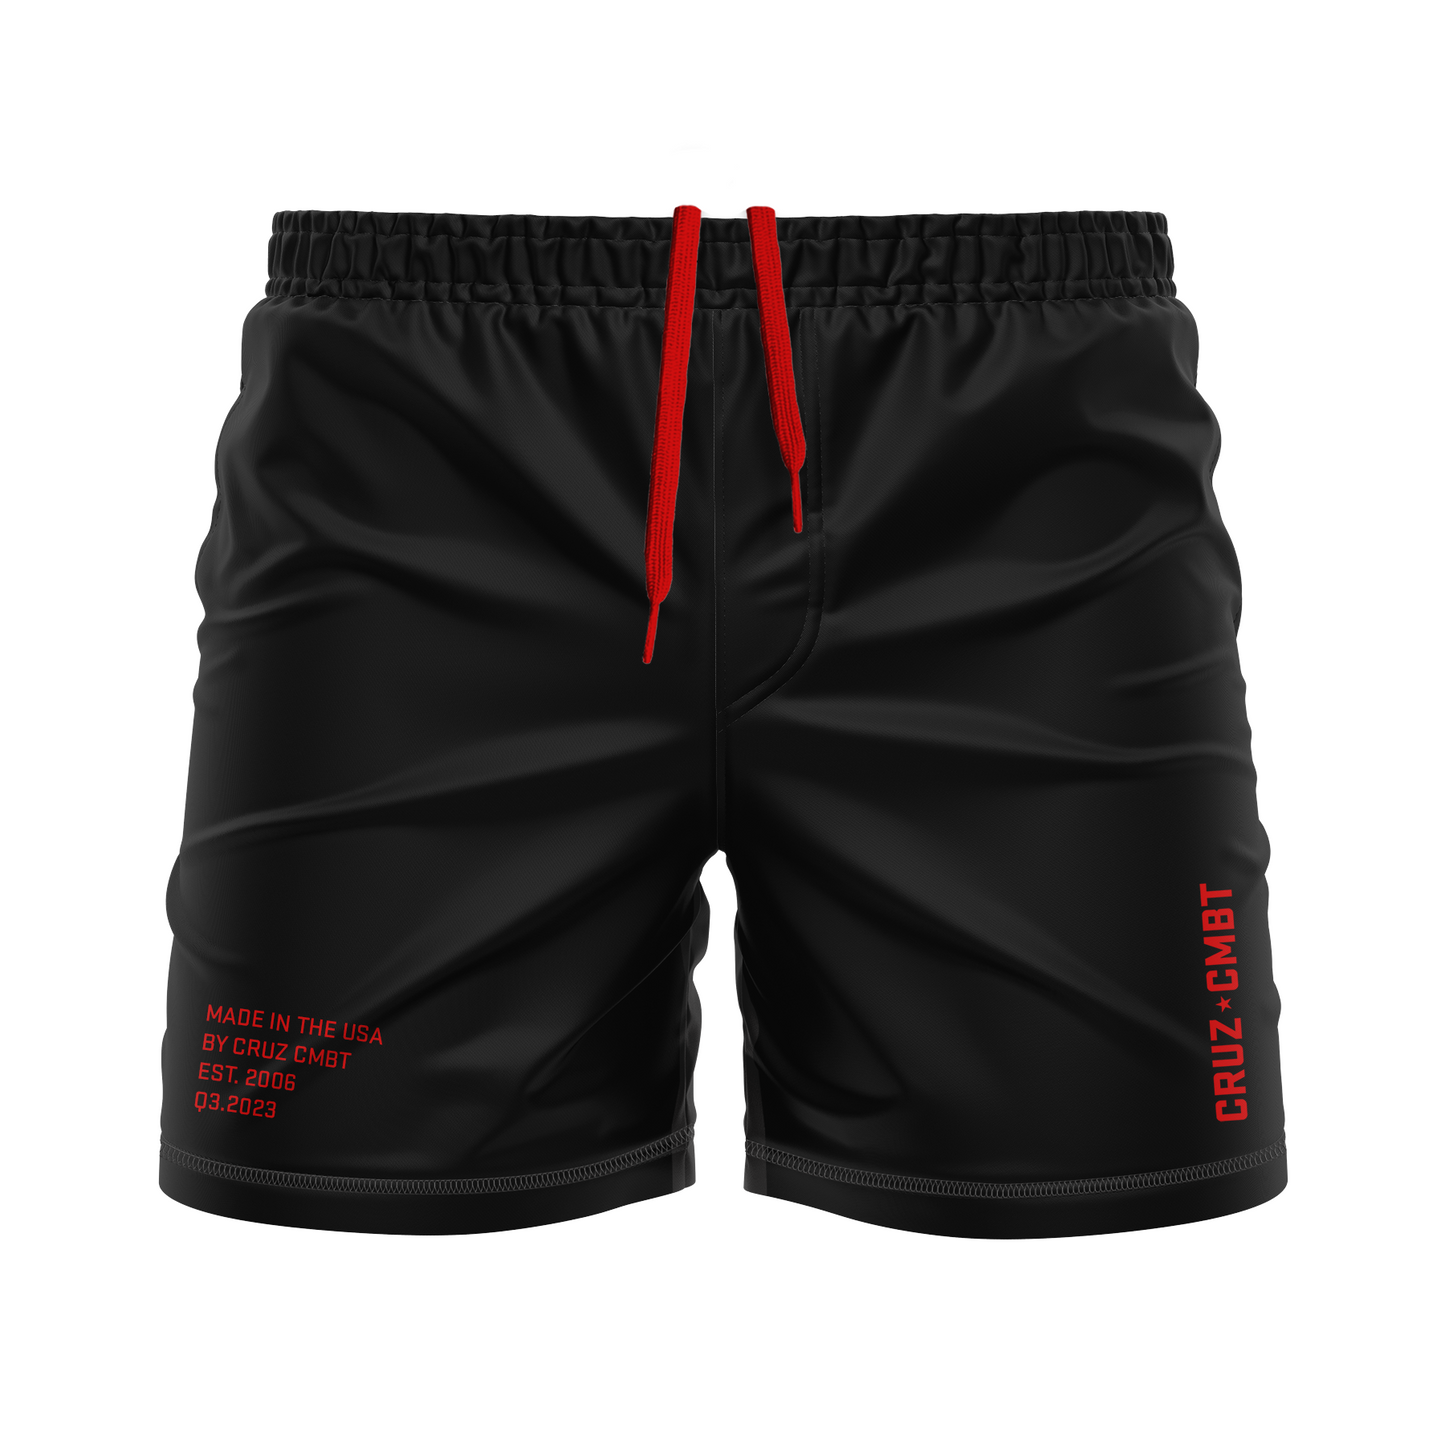 Base Collection men's FC shorts, black and red